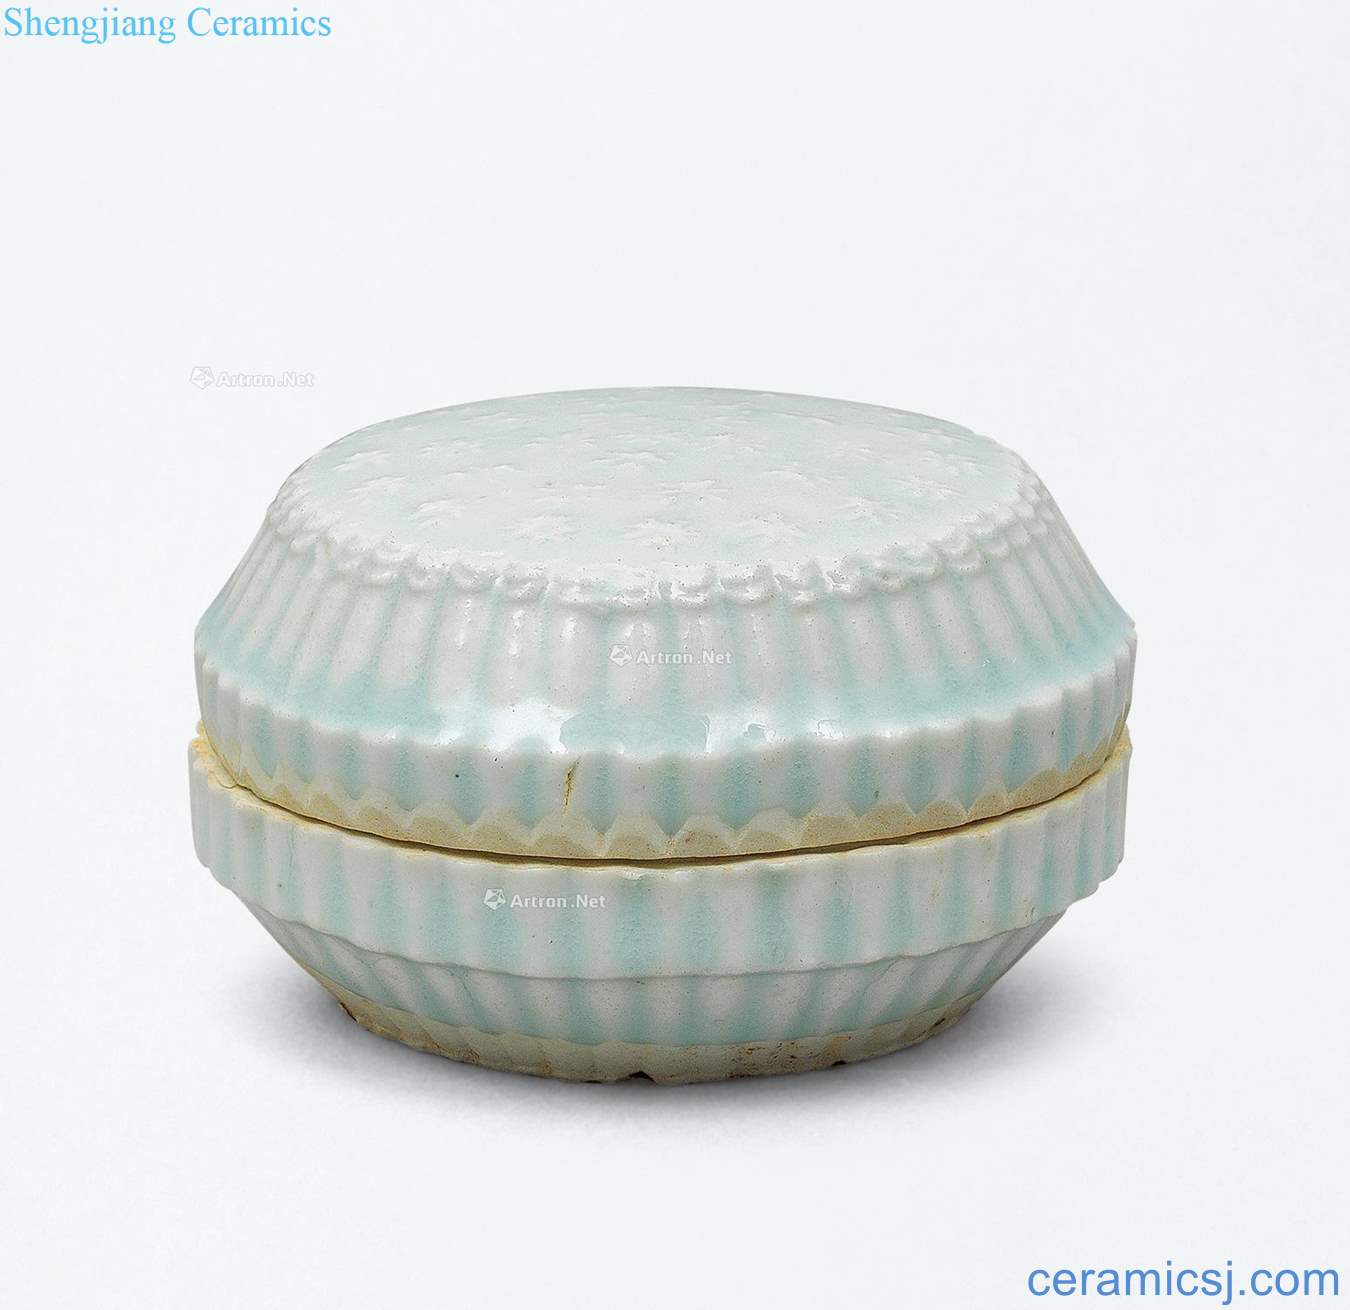 The southern song dynasty Left kiln green white glaze powder compact